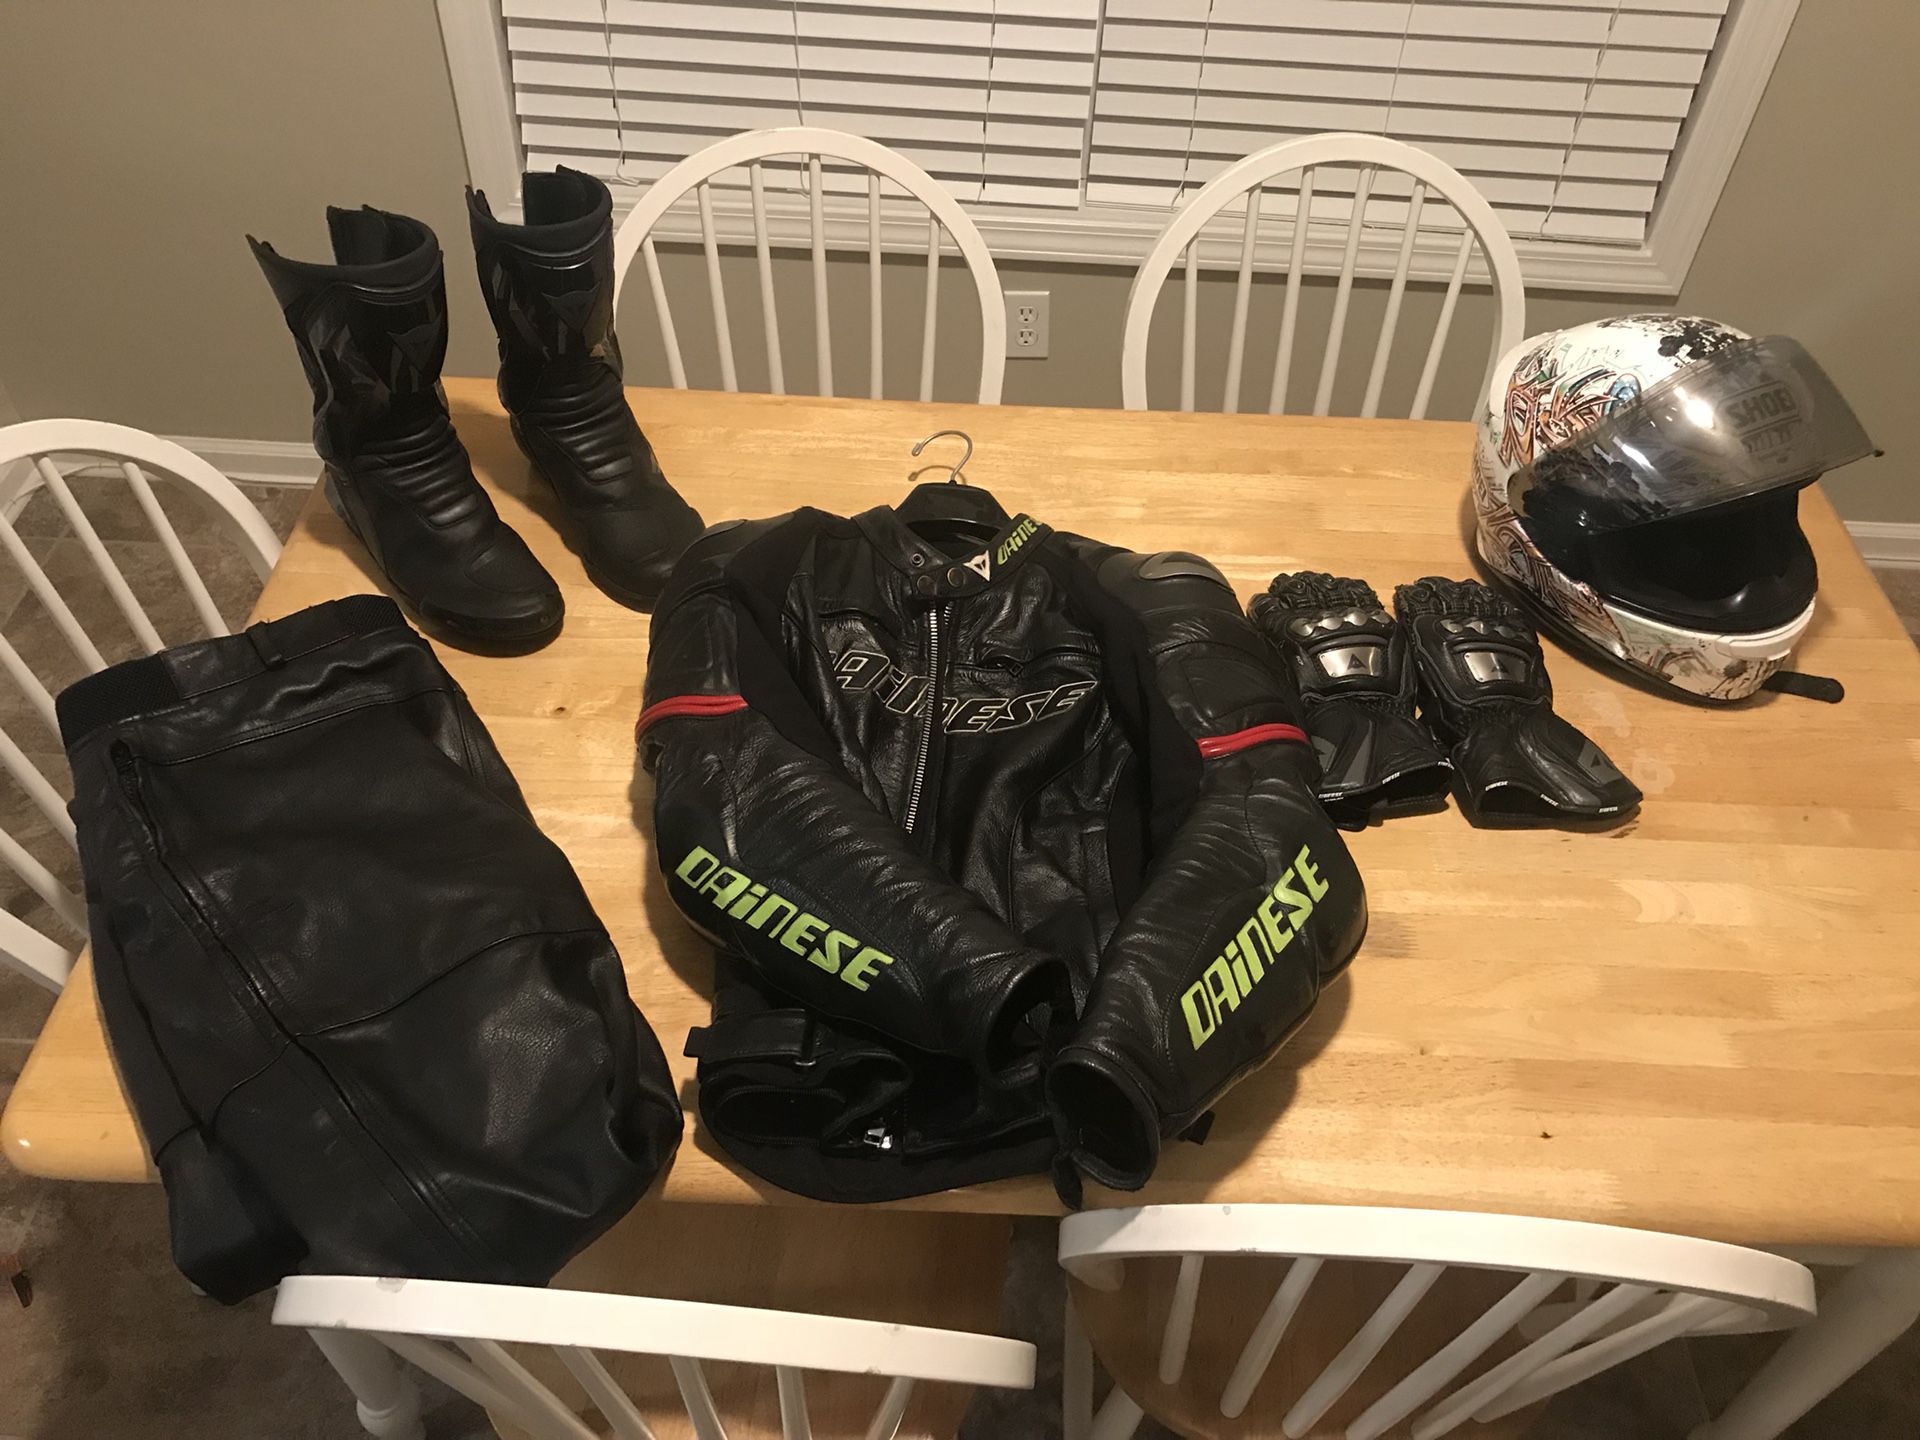 Dainese and shoei motorcycle gear